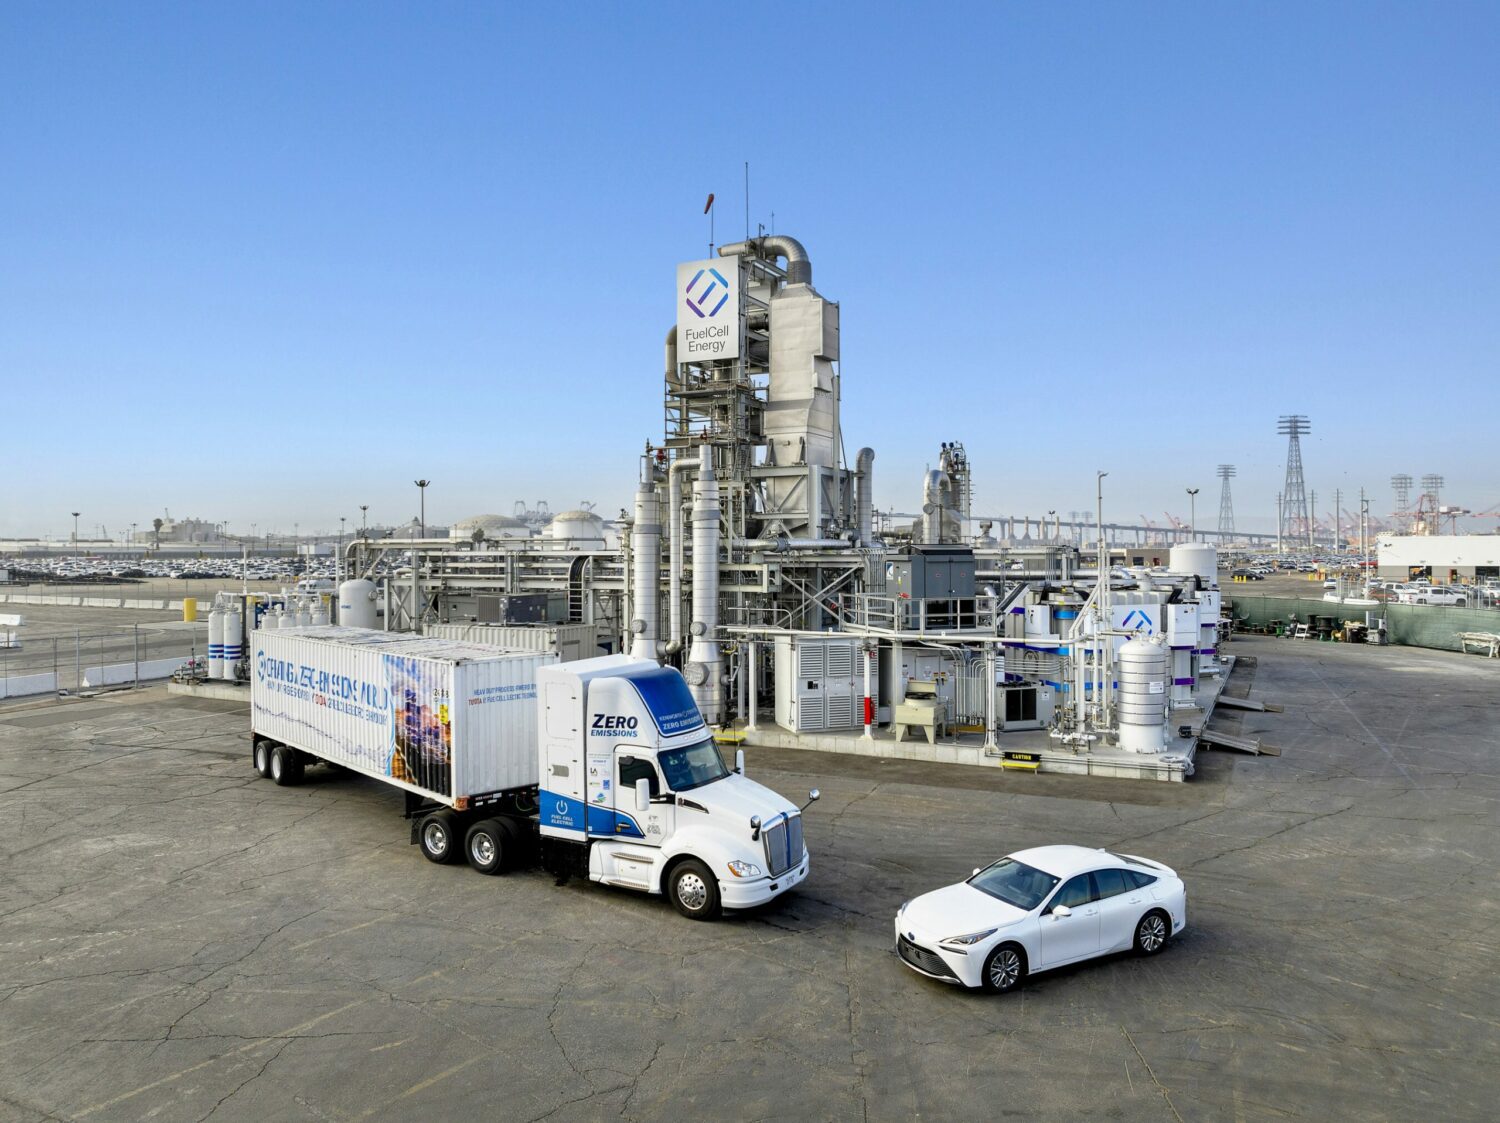 Toyota and FuelCell Energy have completed what they call the world's first "tri-gen system," capable of producing renewable electricity.